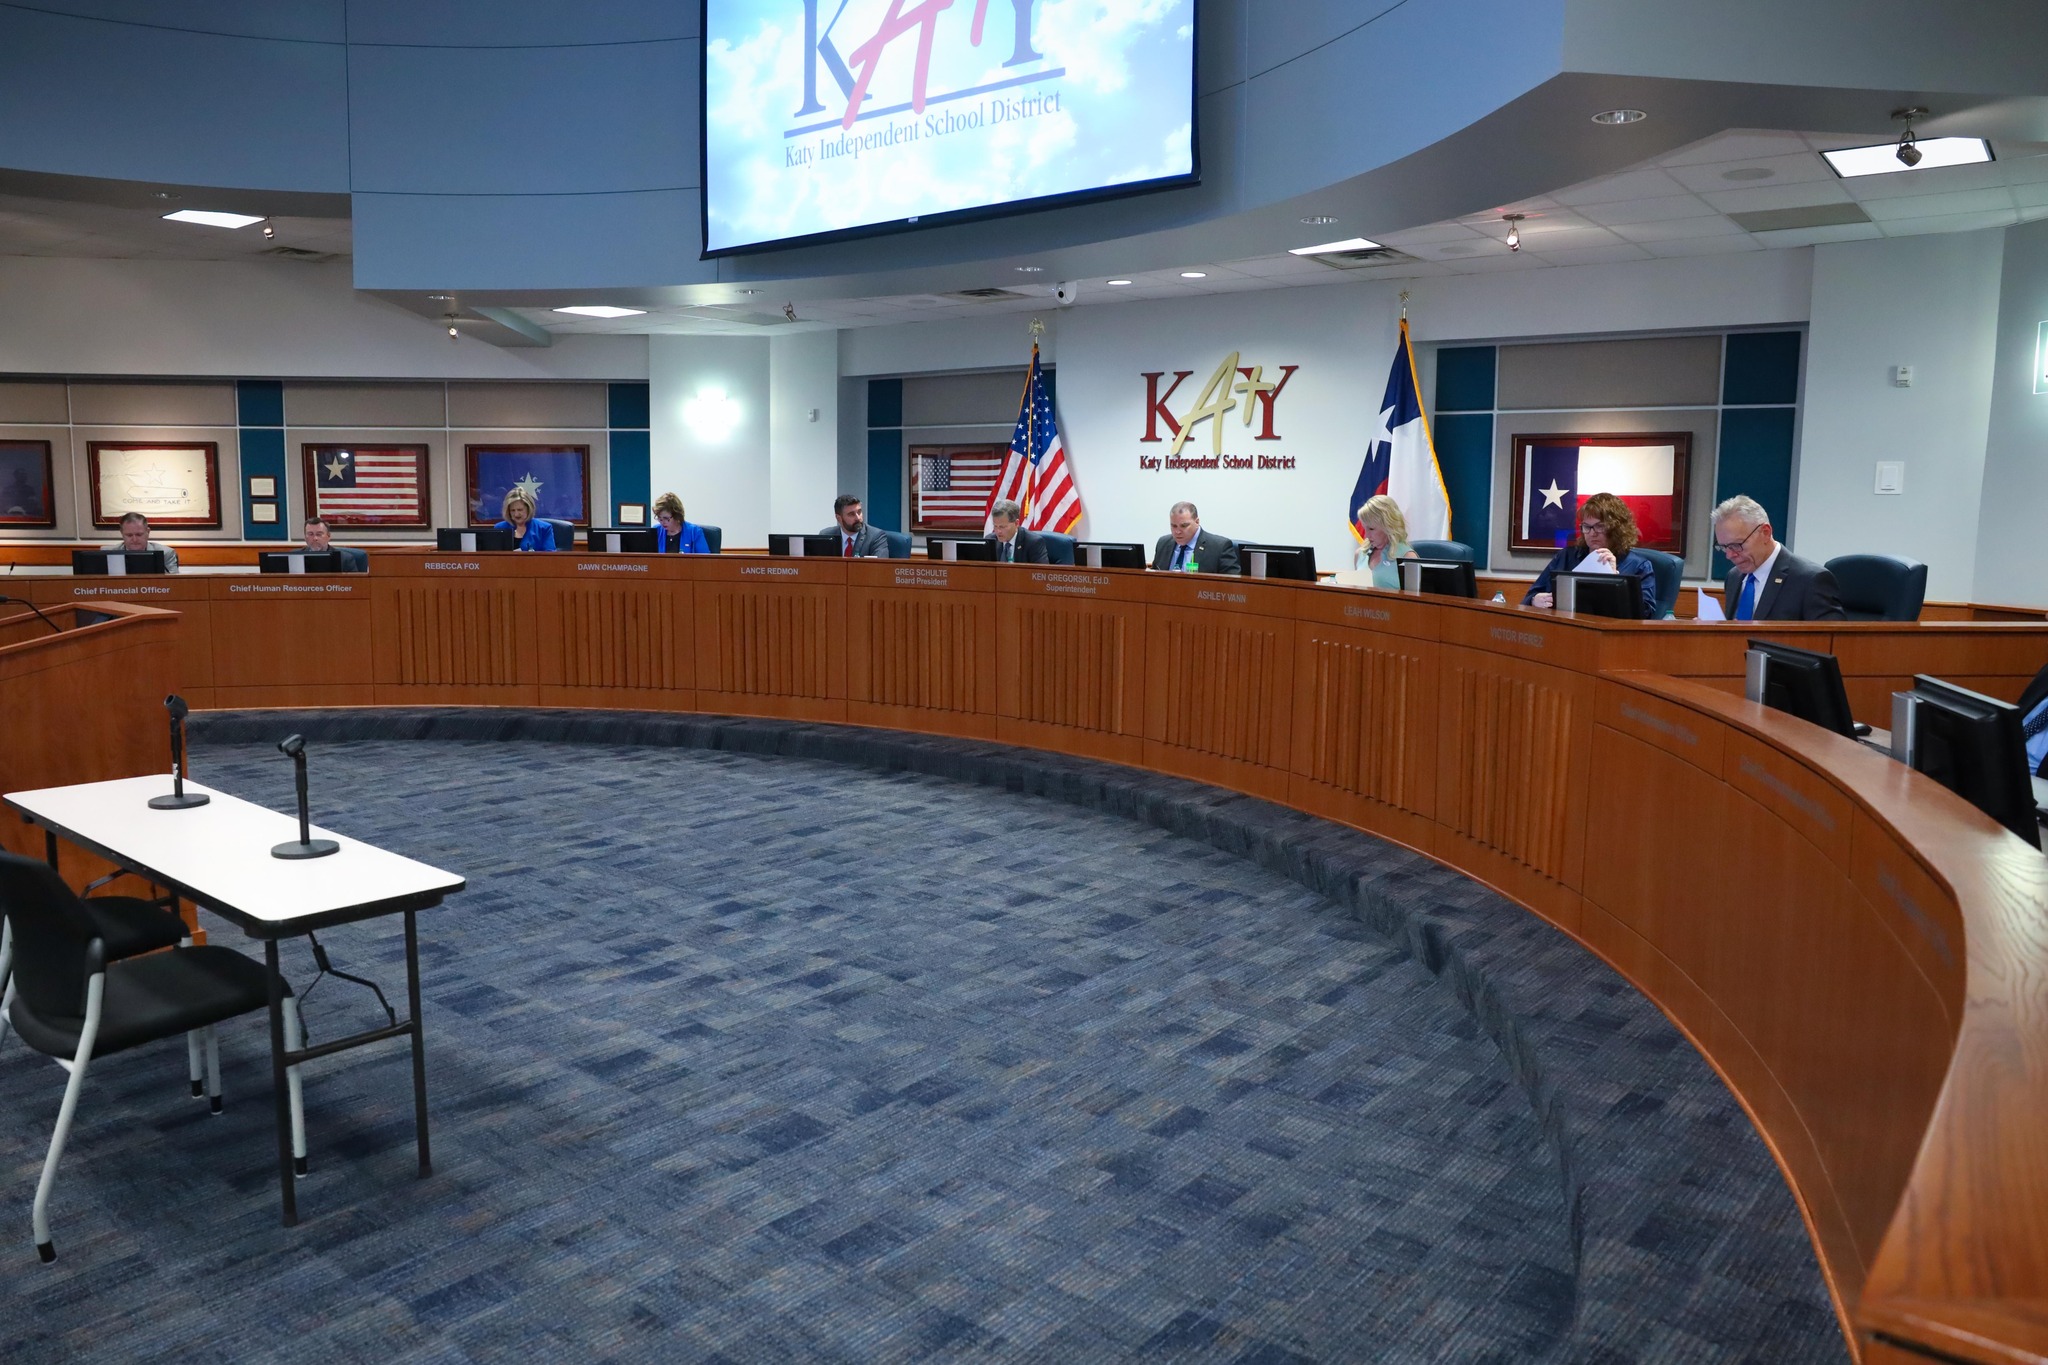 Regular Board Meeting of the Katy ISD Board of Trustees Set for October 30